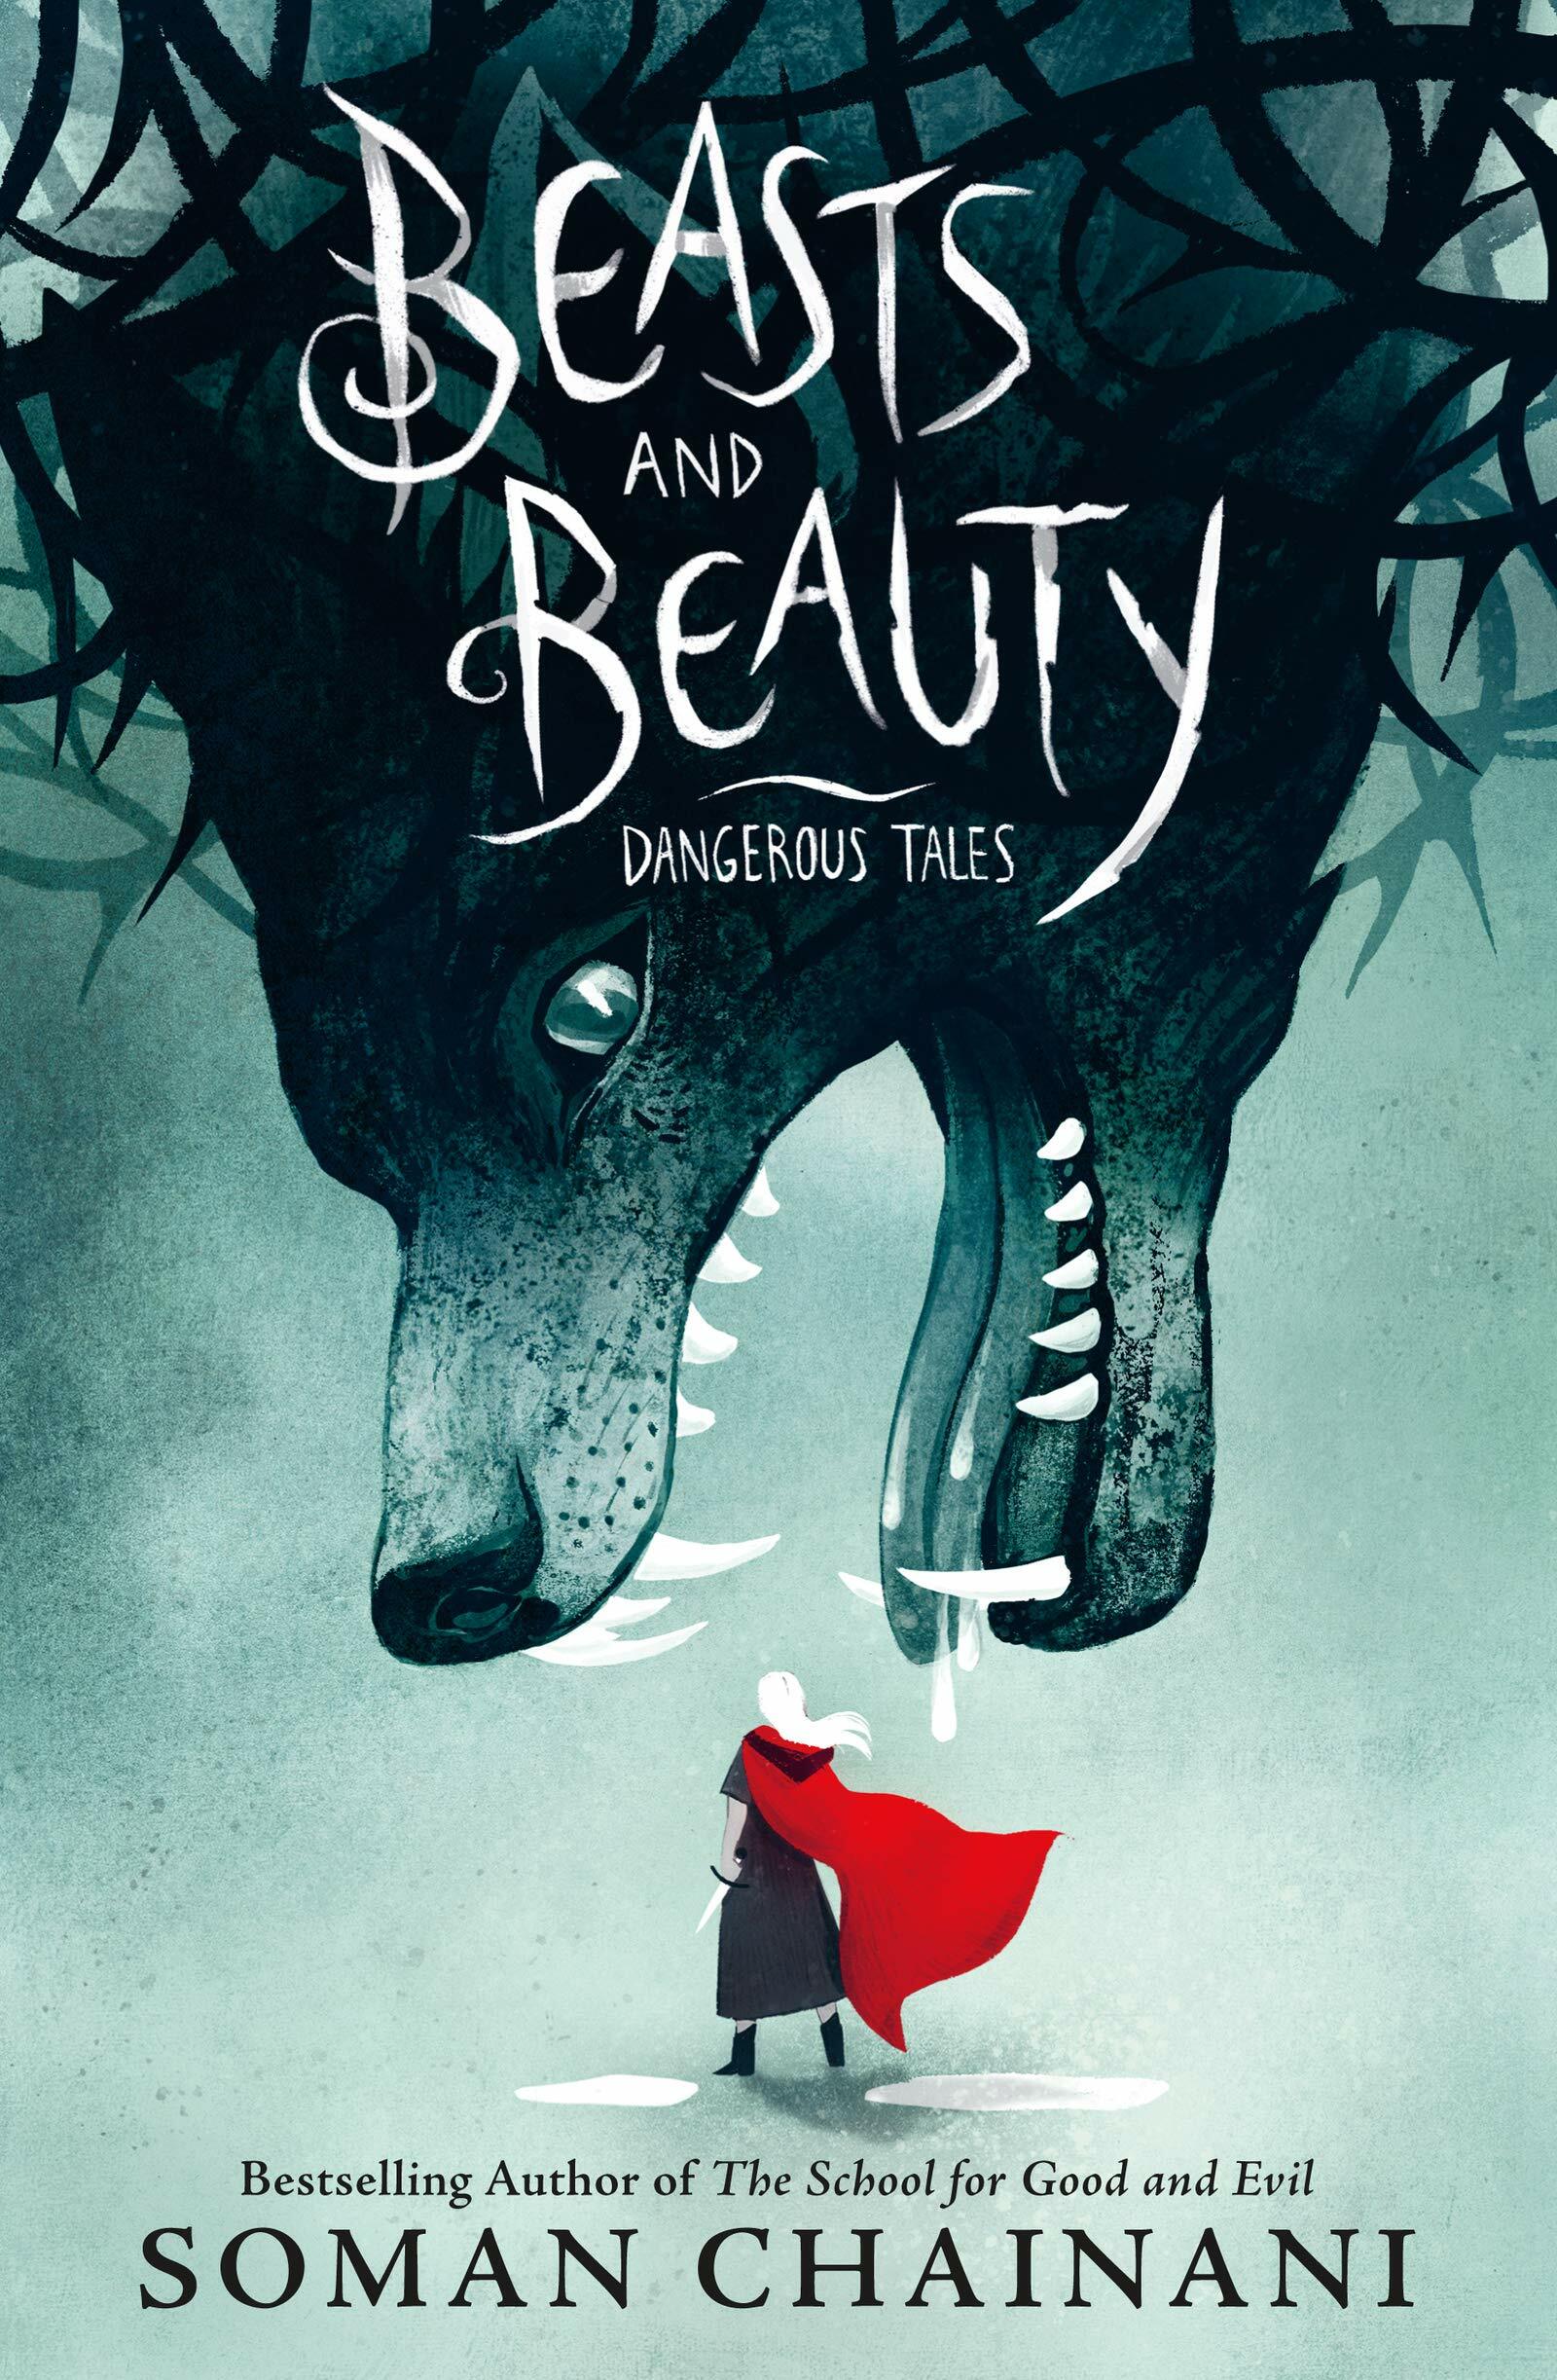 Beasts and Beauty: Dangerous Tales (Hardcover)